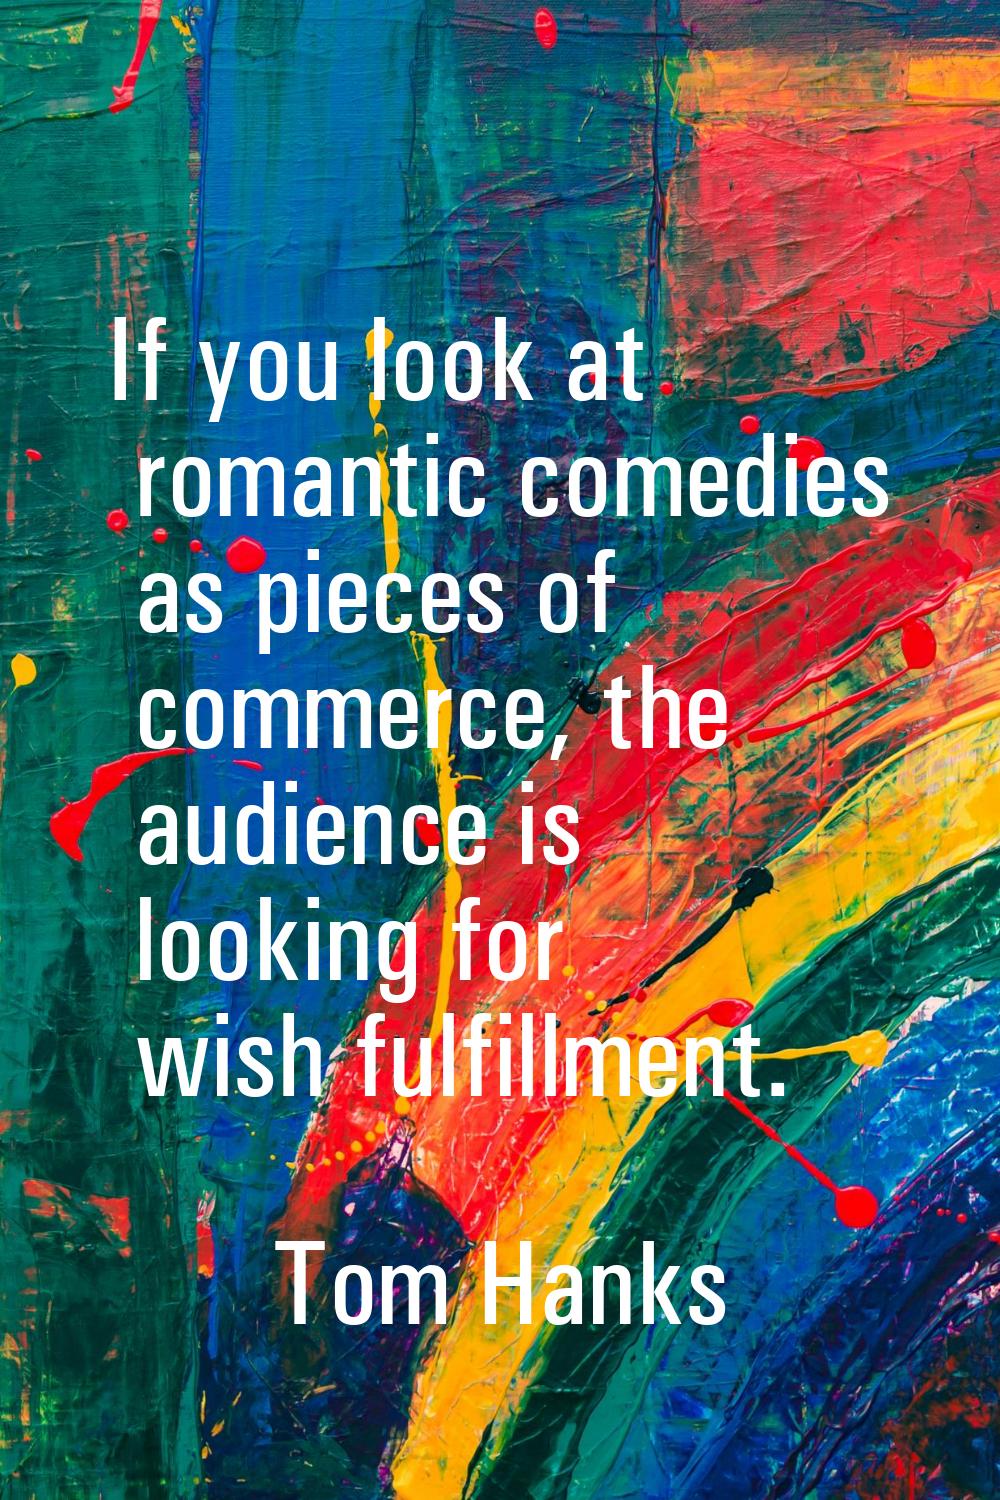 If you look at romantic comedies as pieces of commerce, the audience is looking for wish fulfillmen